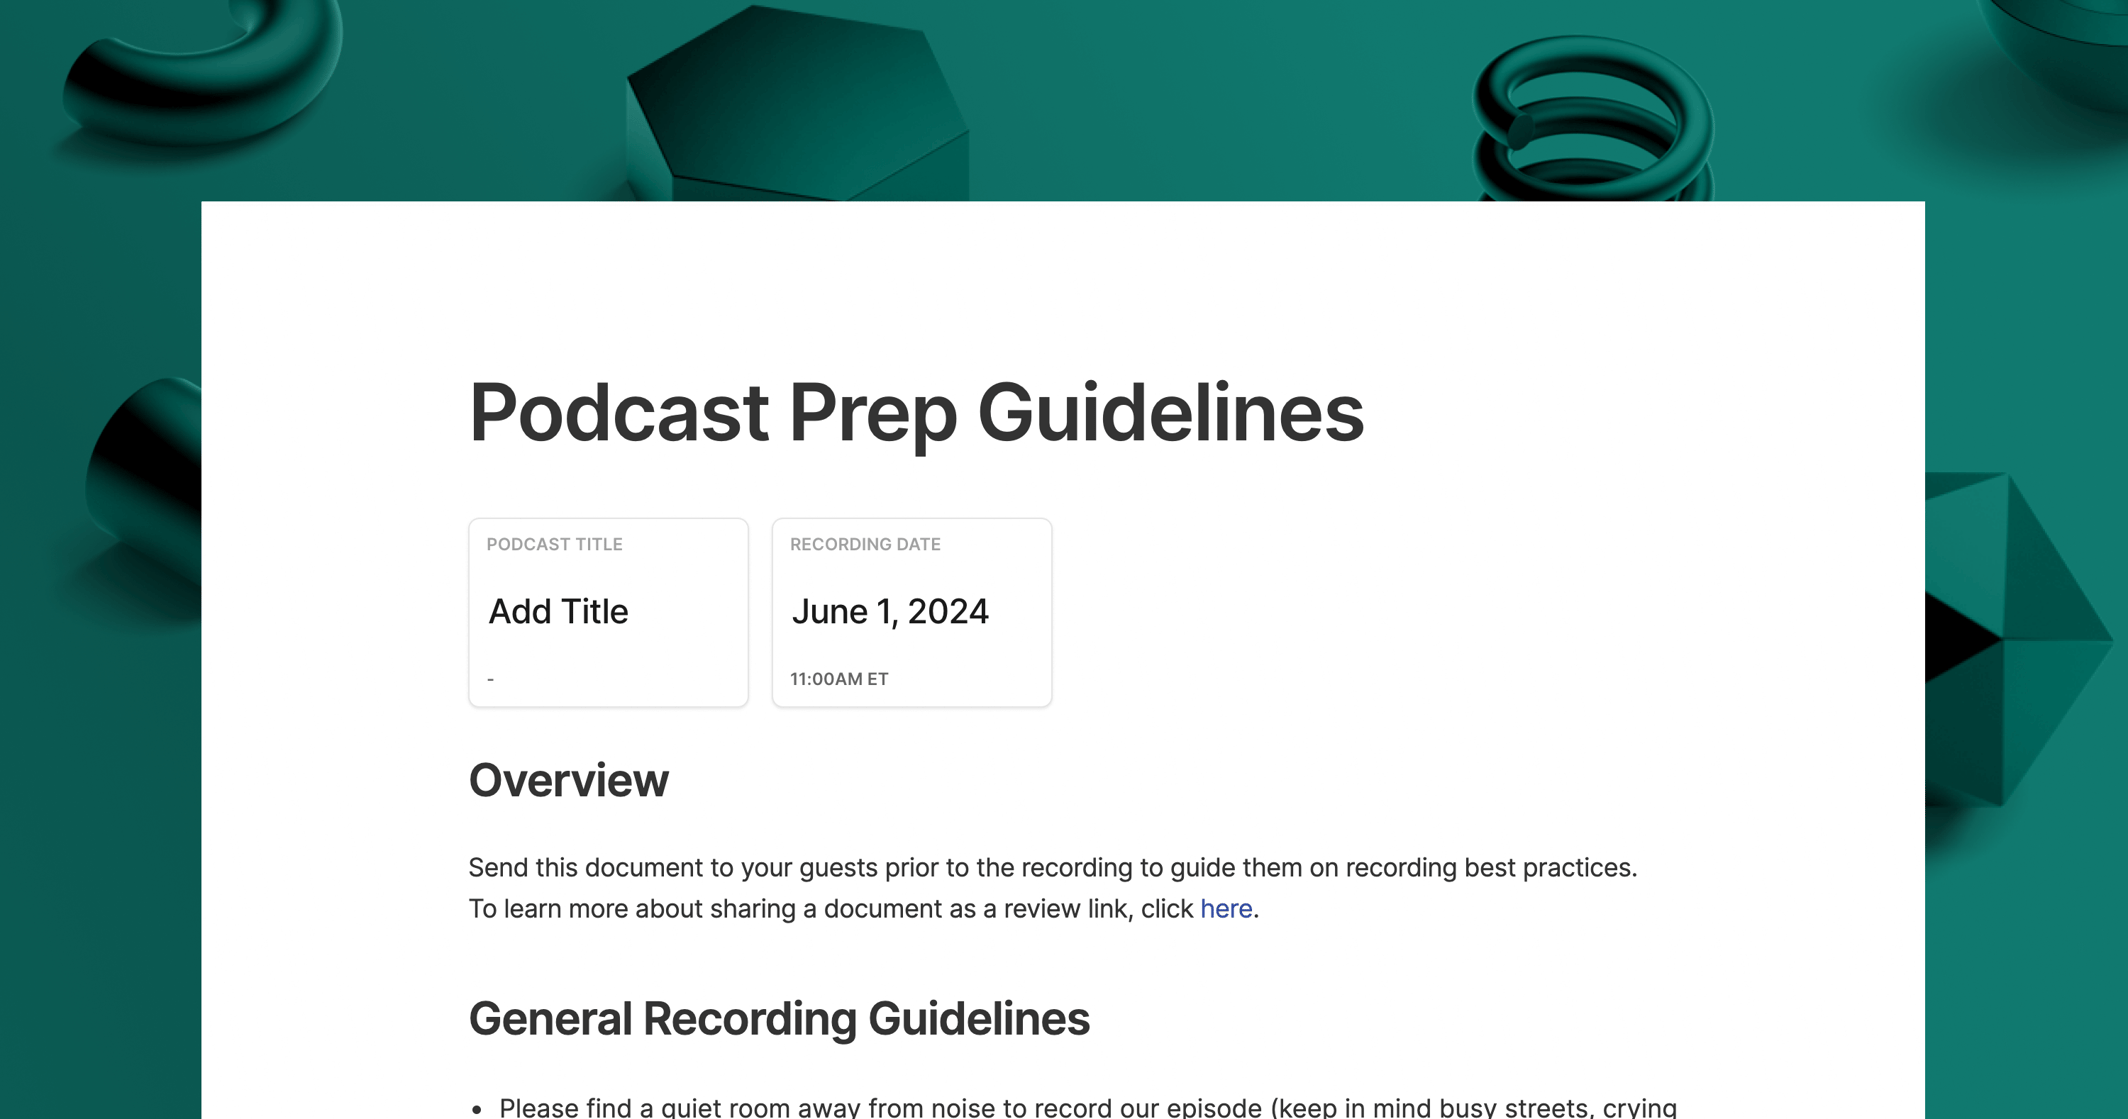 https://3389140.fs1.hubspotusercontent-na1.net/hubfs/3389140/podcast%20prep%20guidelines%20cover-1.png